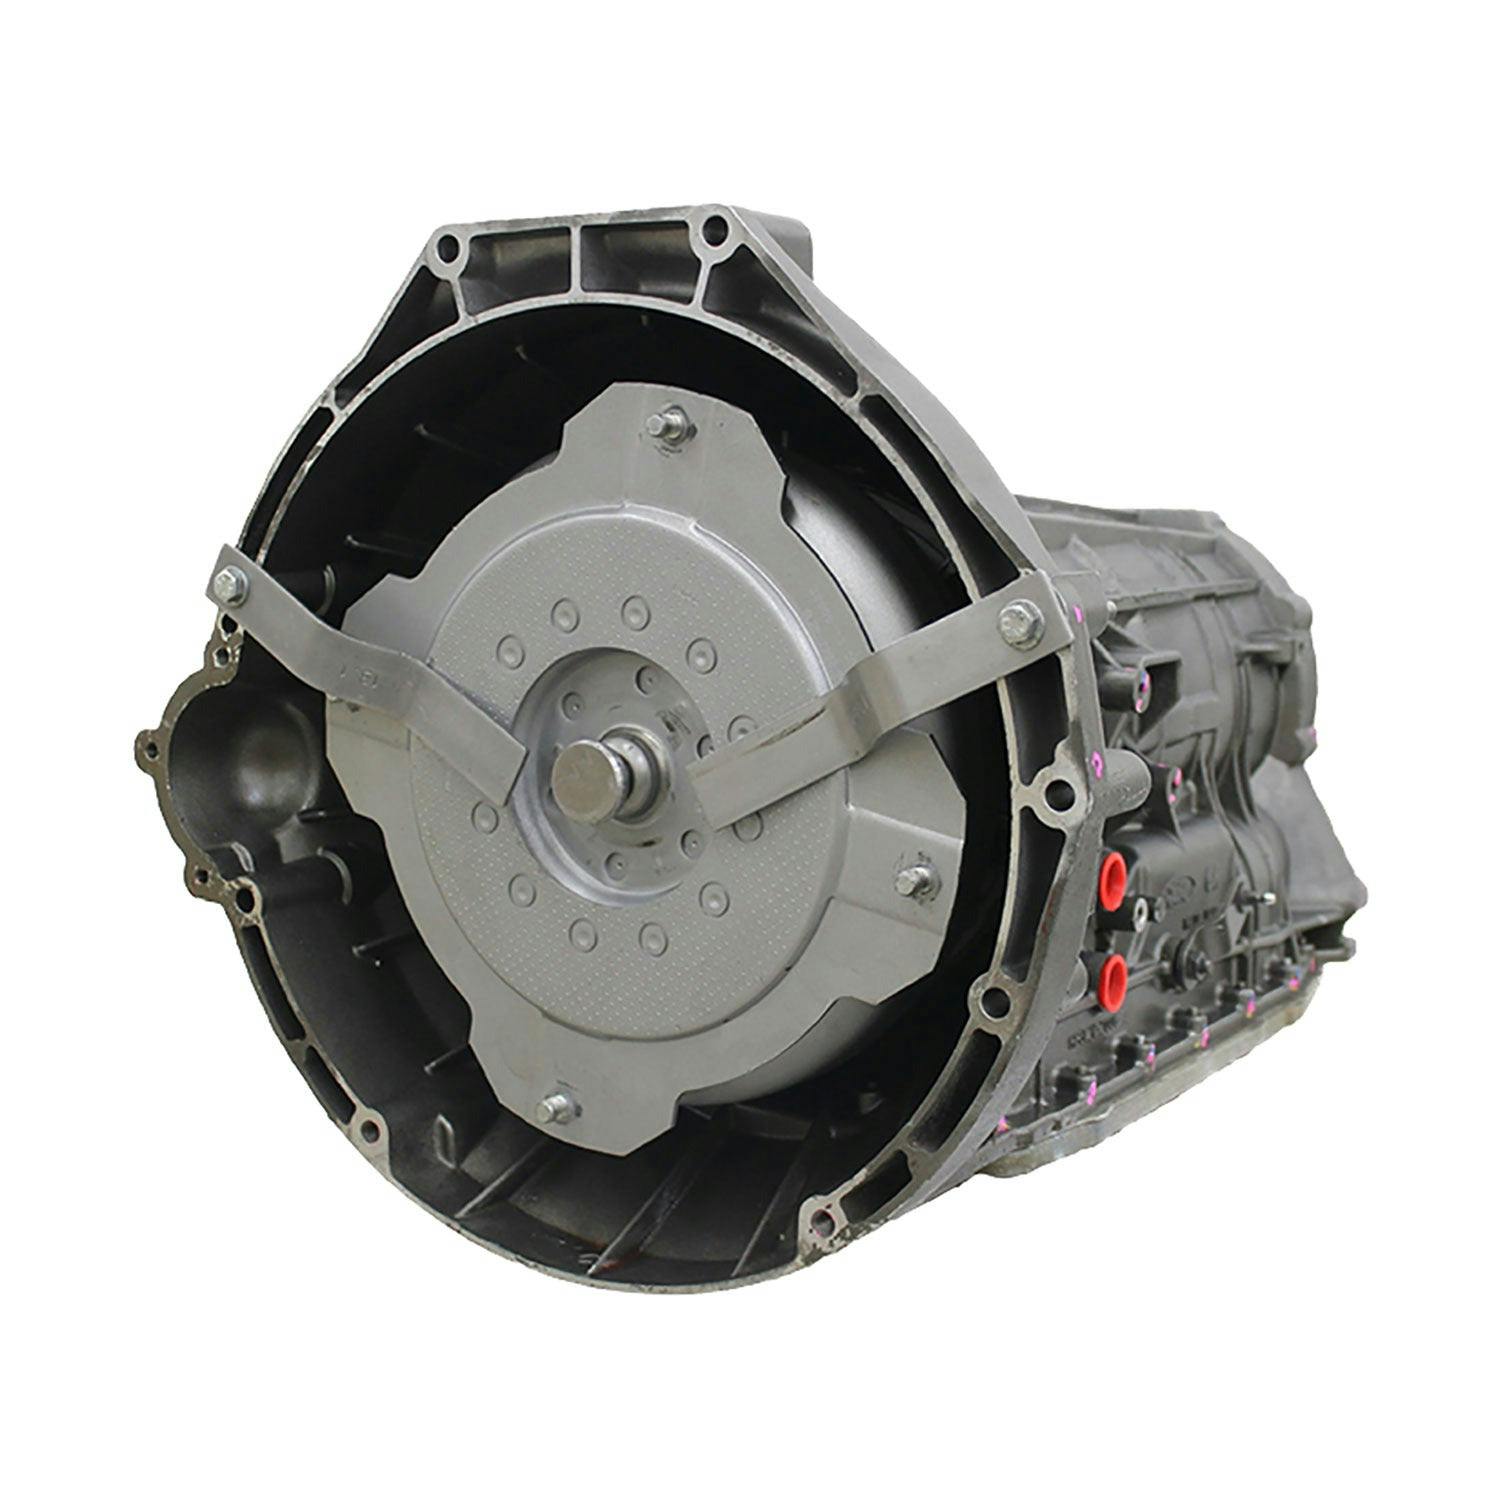 Automatic Transmission for 2008 Ford Explorer/Explorer Sport Trac and Mercury Mountaineer 4WD with 4.6L V8 Engine